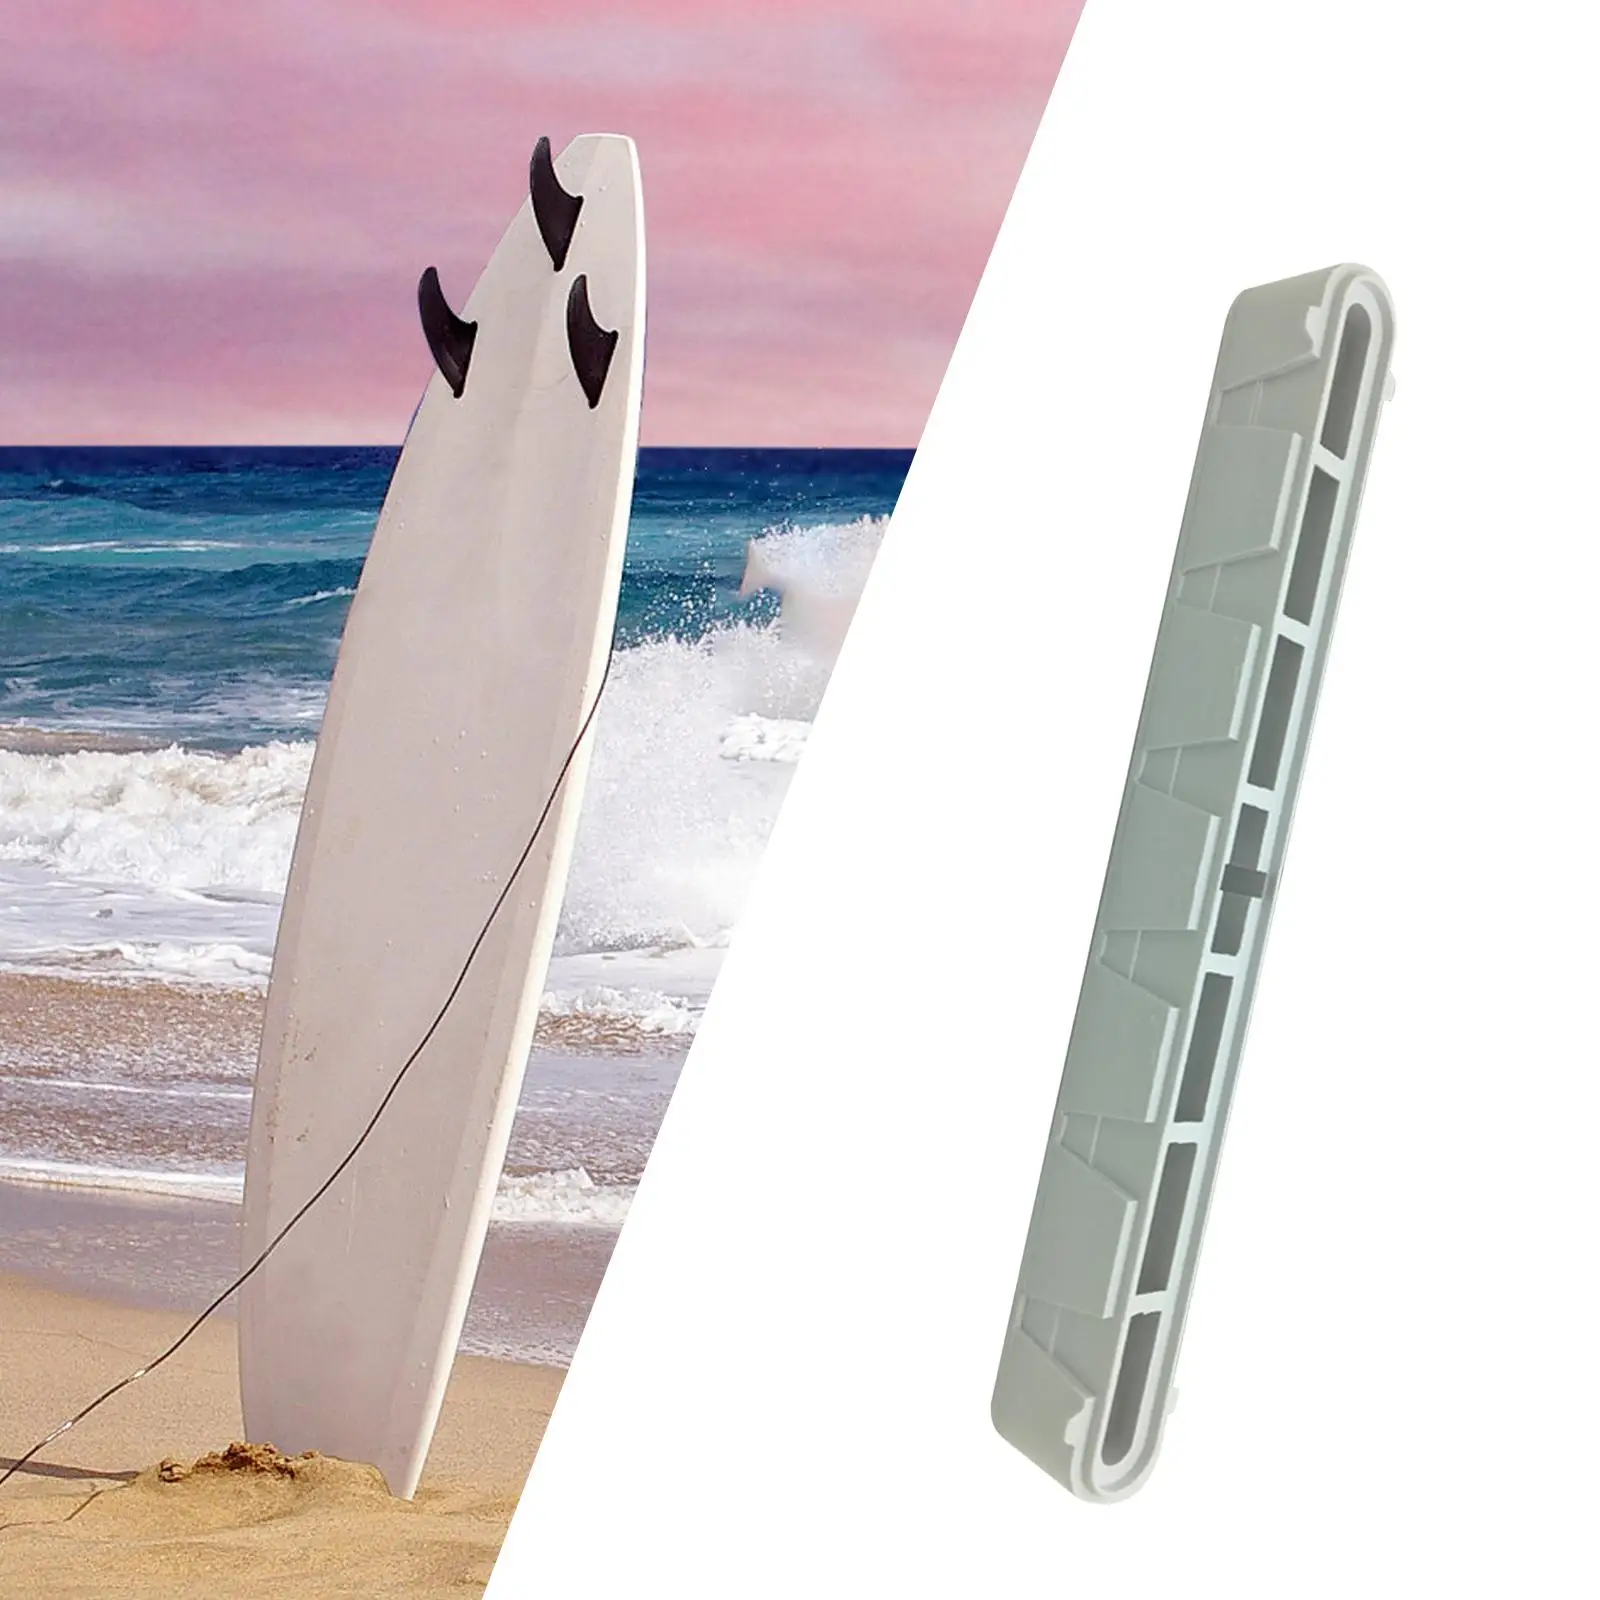 Longboard Surfboard Fin Box Surfboard Fin Box for Surfboards Paddle Boards